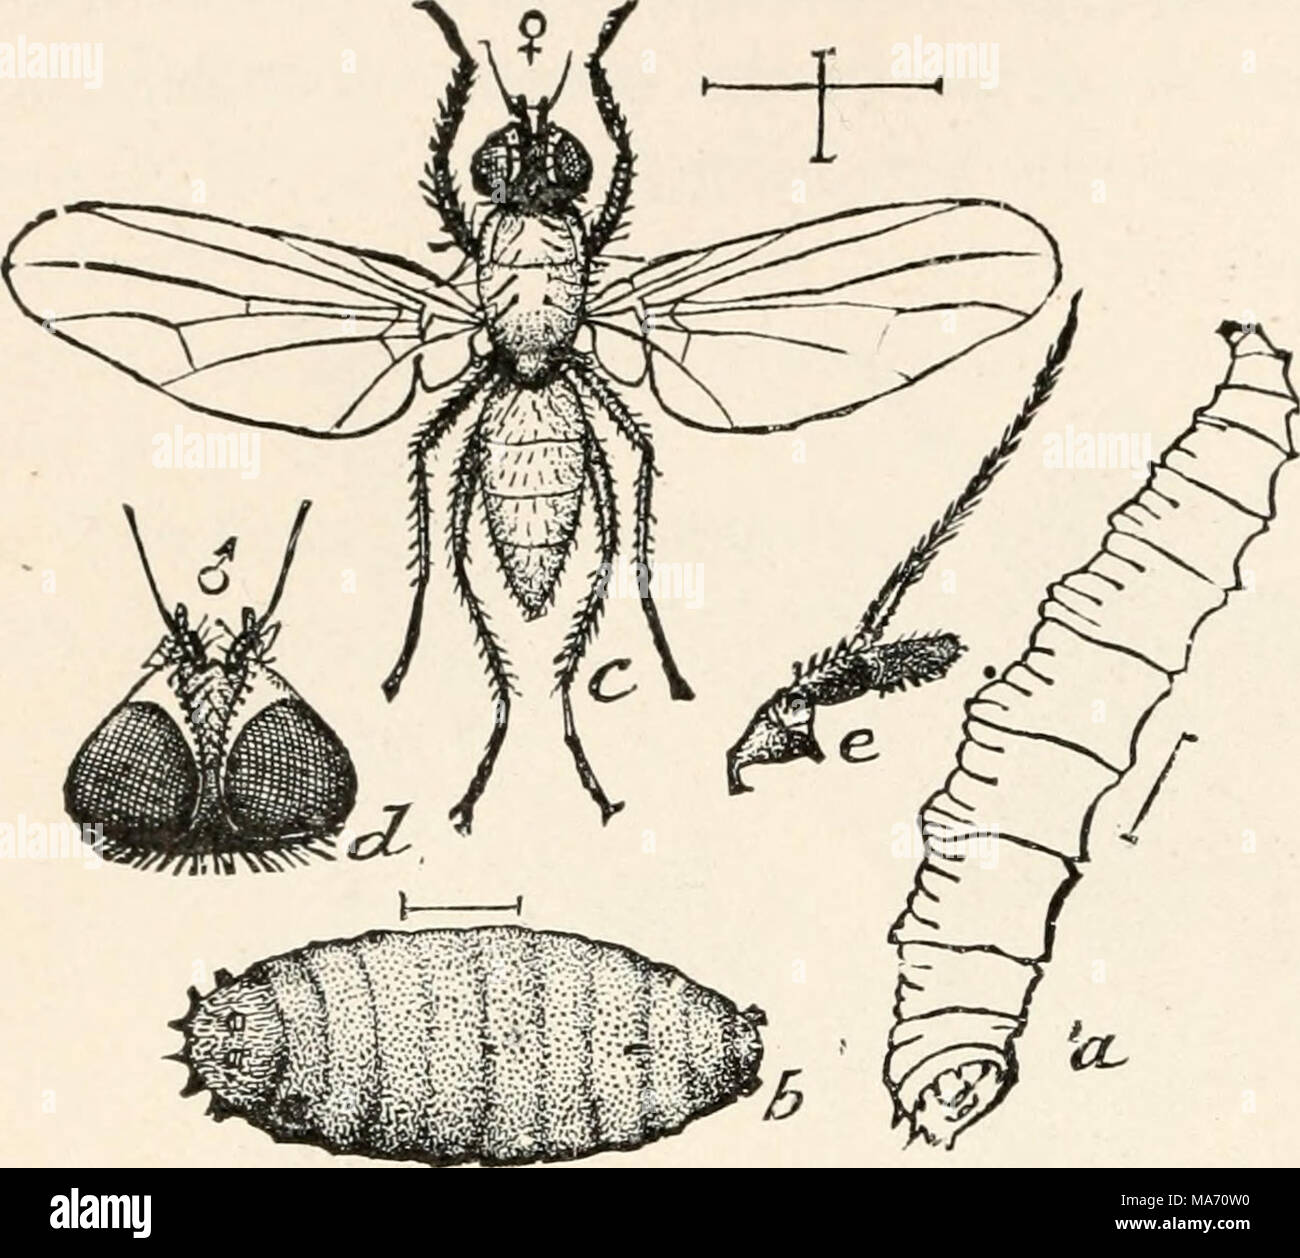 . Elementary entomology . FIG. 378. The cabbage-maggot. (Enlarged) , pupa ; c, adult; d, head ; e, antenna. (After Riley) maggot and onion-maggot are well-known examples of these inju- rious larvae, and wherever small flies are seen hovering around these or other root crops, such as radishes, turnips, beets, etc., Stock Photo